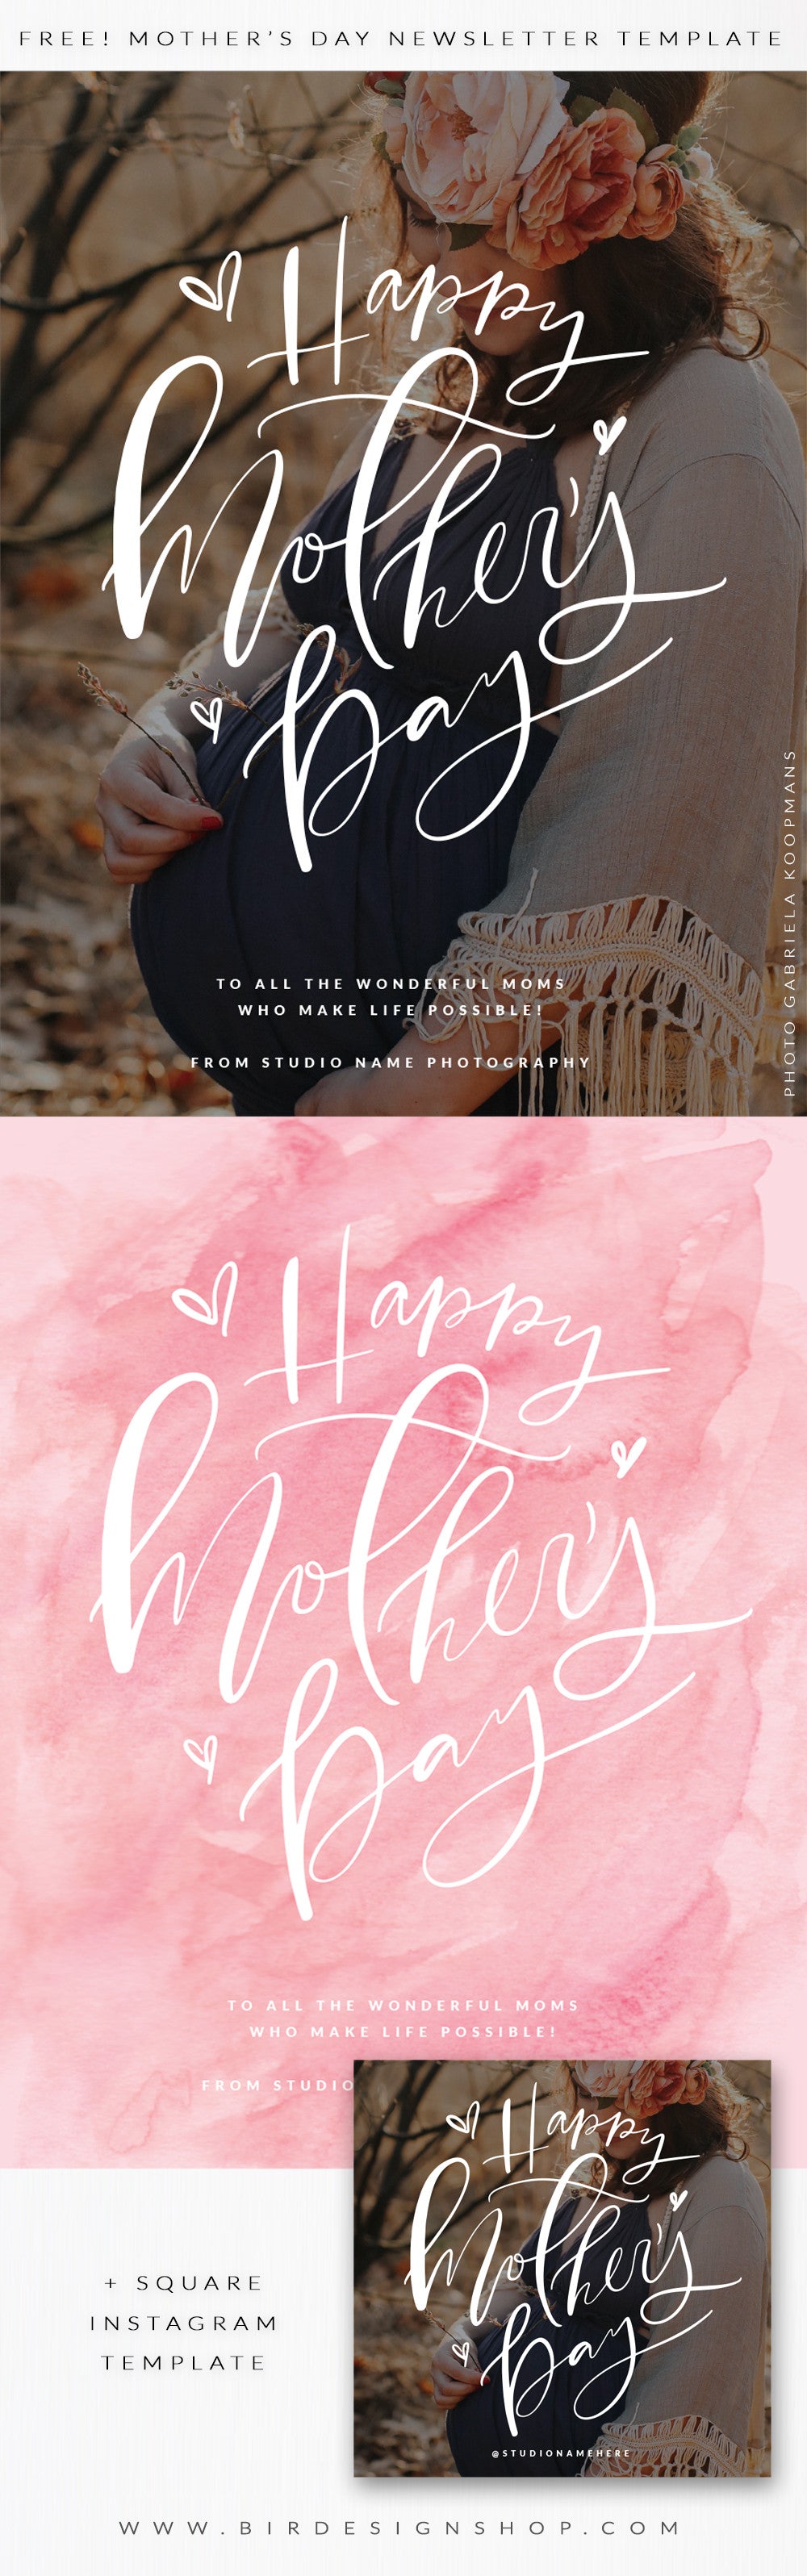 FREE templates - Mother's Day marketing newsletter